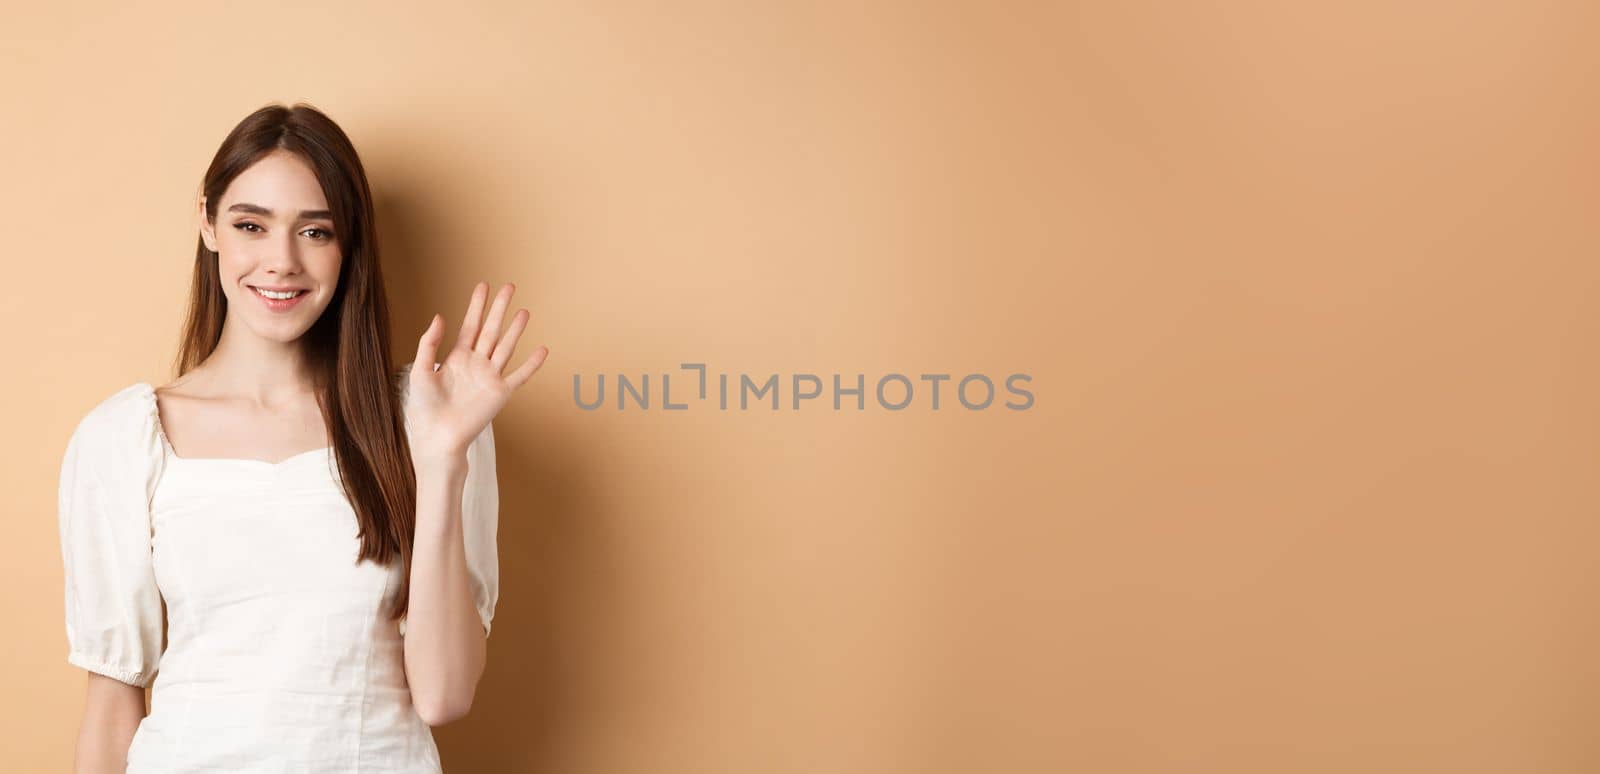 Friendly smiling woman say hello, waiving hand to greet you, standing cheerful on beige background.